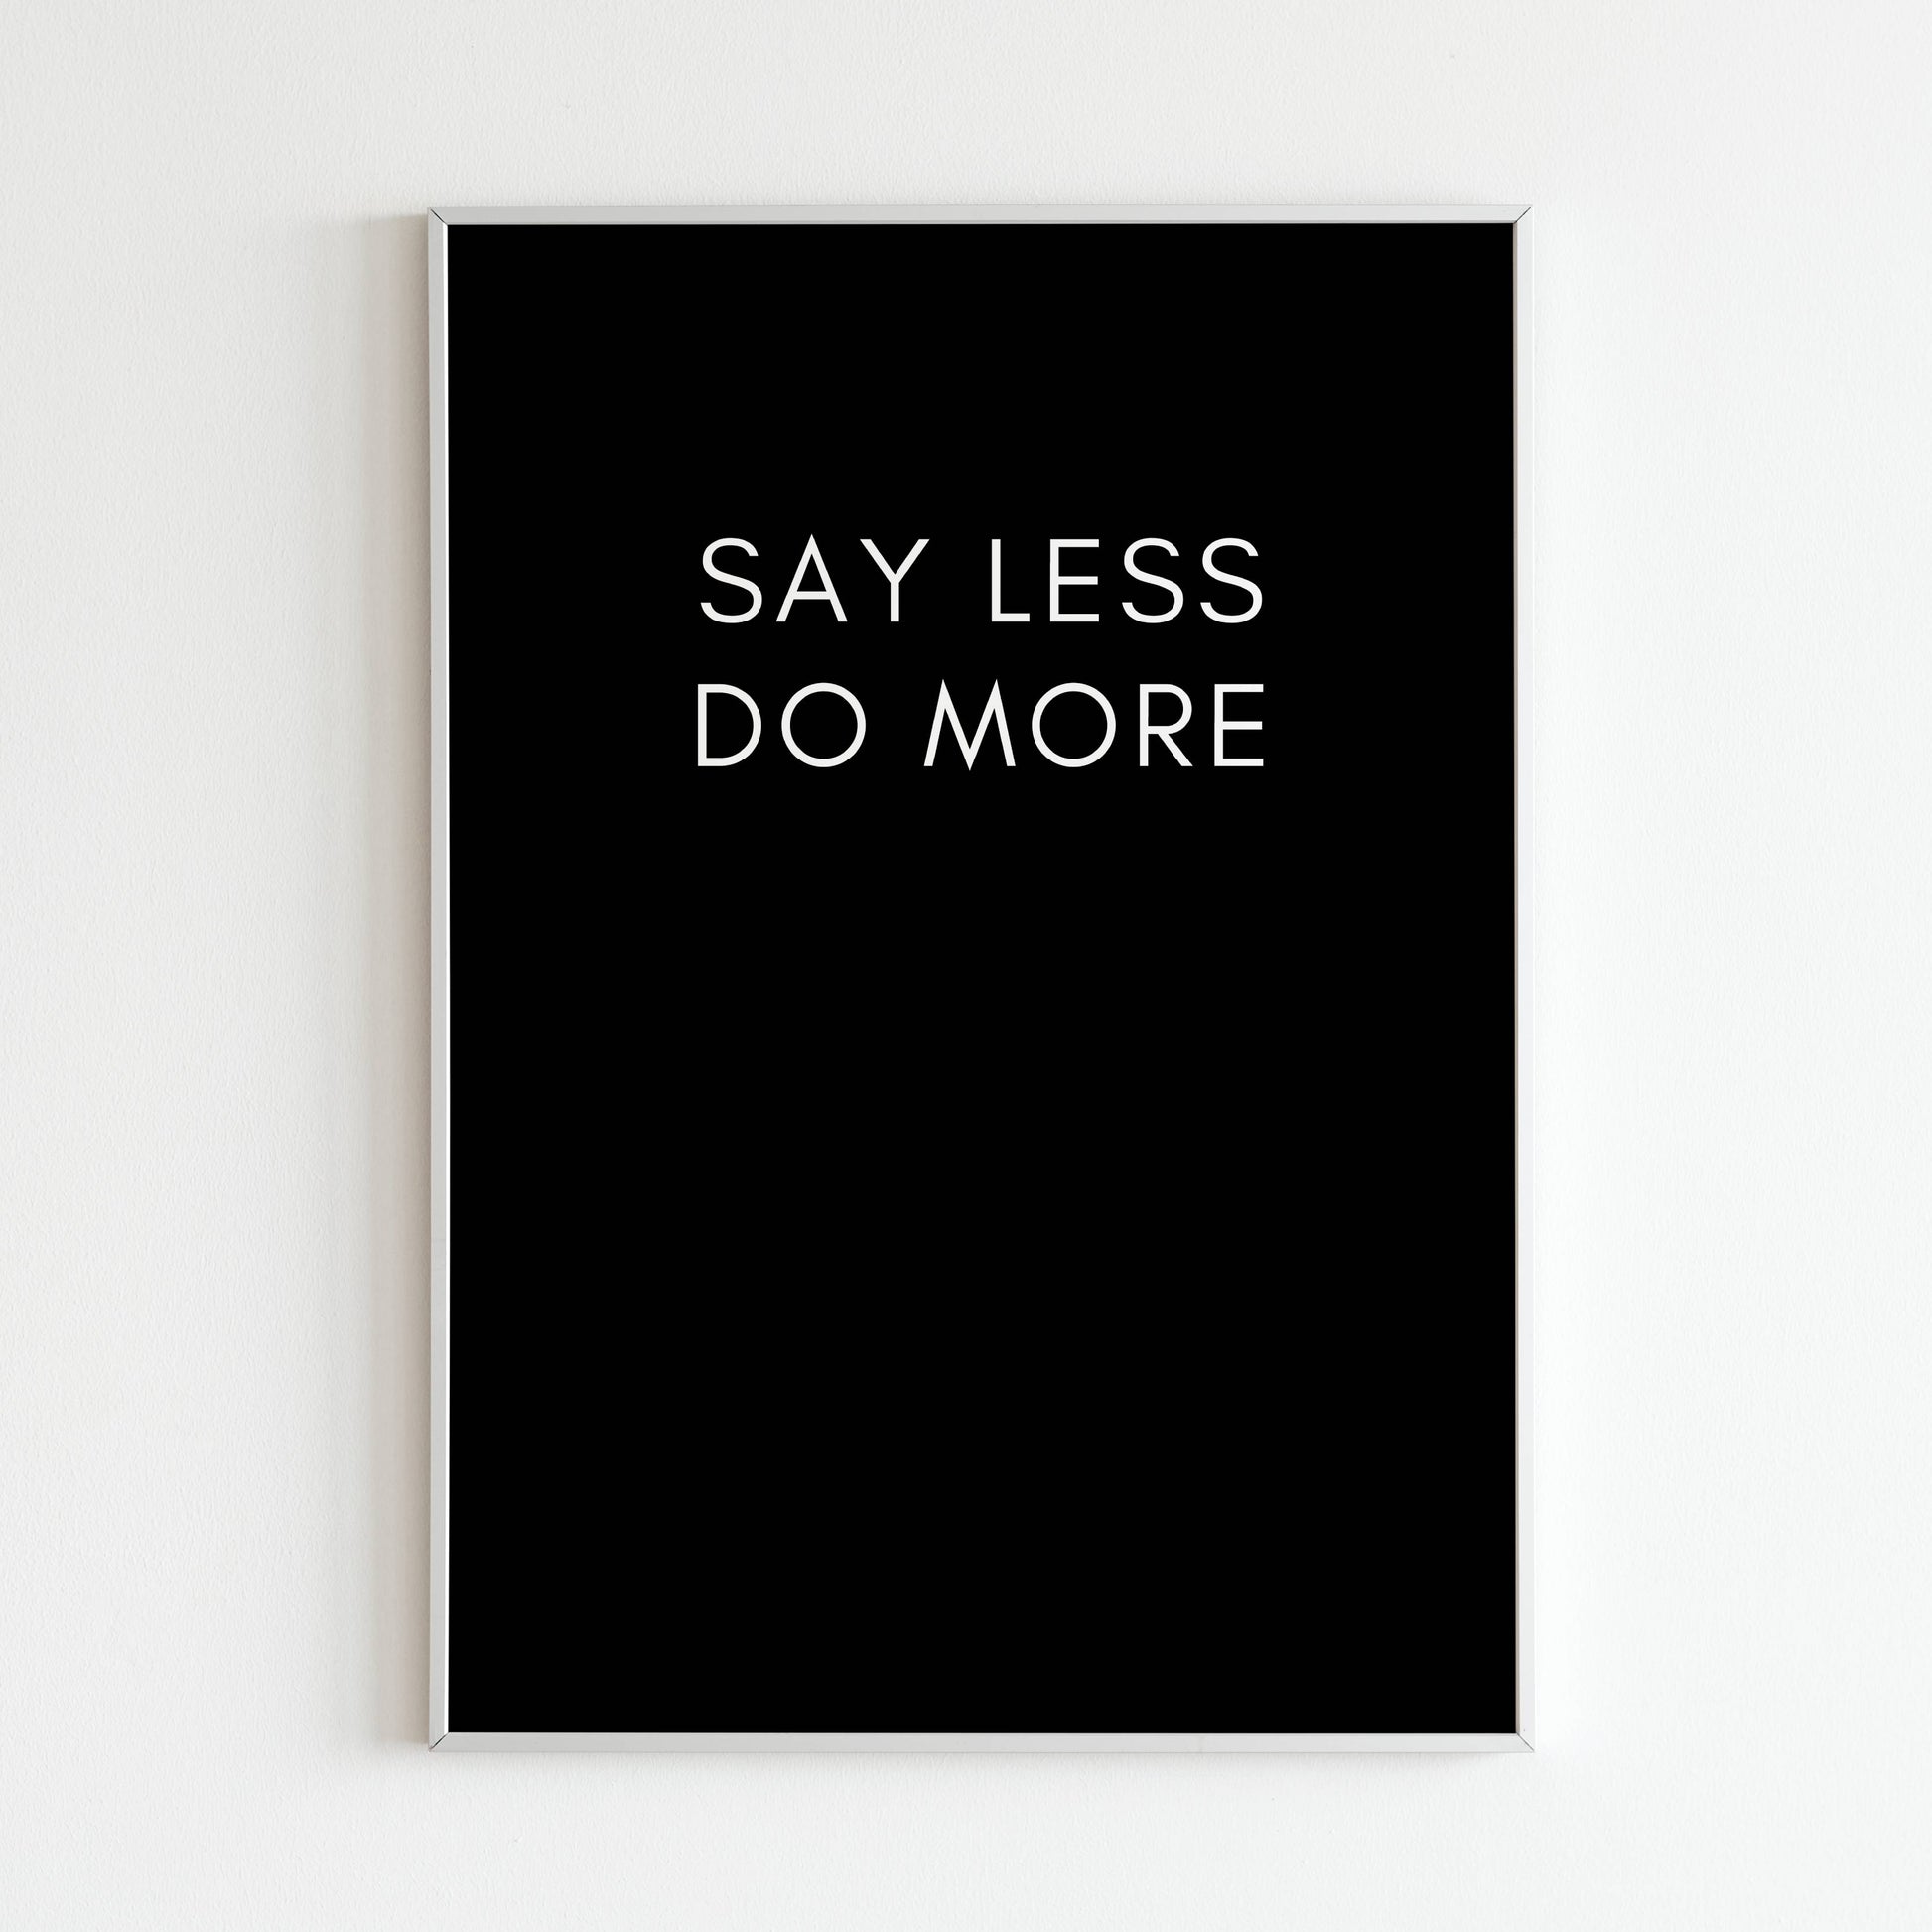 Downloadable "Say less do more" art print, inspire taking action and focusing on results.